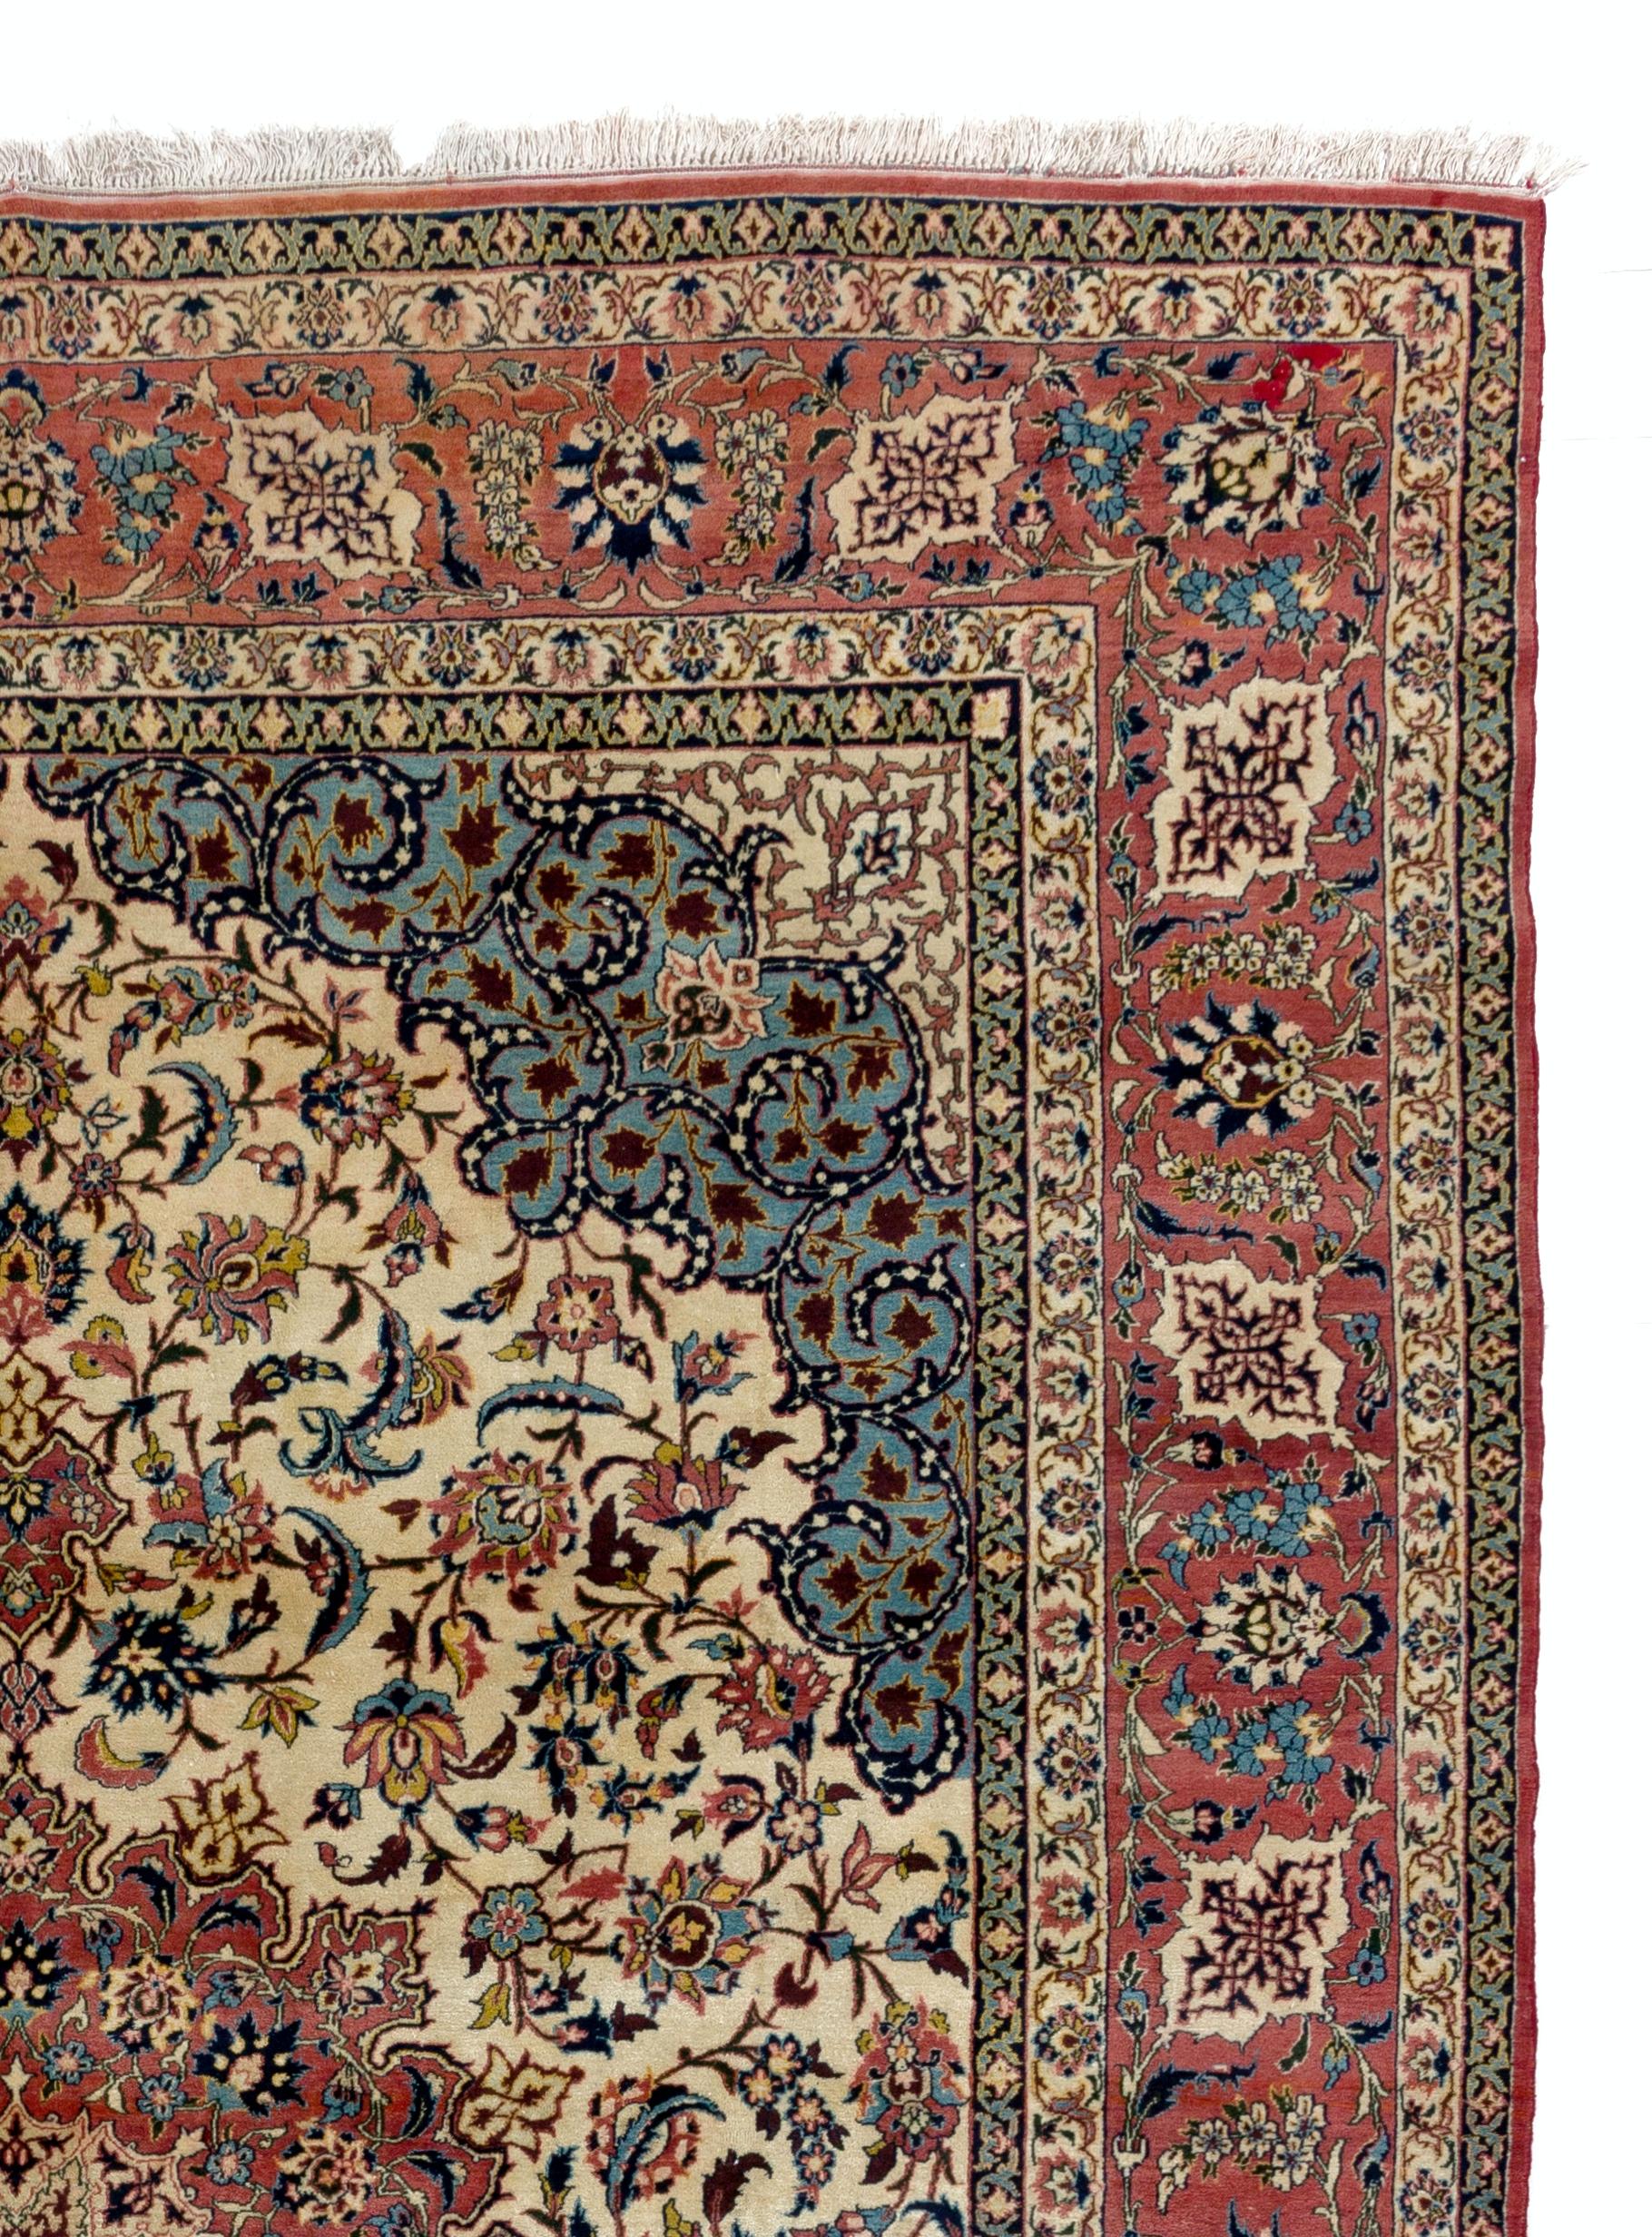 This elegant rug features an ivory field richly decorated with scrolling floral vines centered by a cusped brick red/brown medallion flanked at each end with large palmettes enclosed by sky blue spandrels with a large border of palmettes and